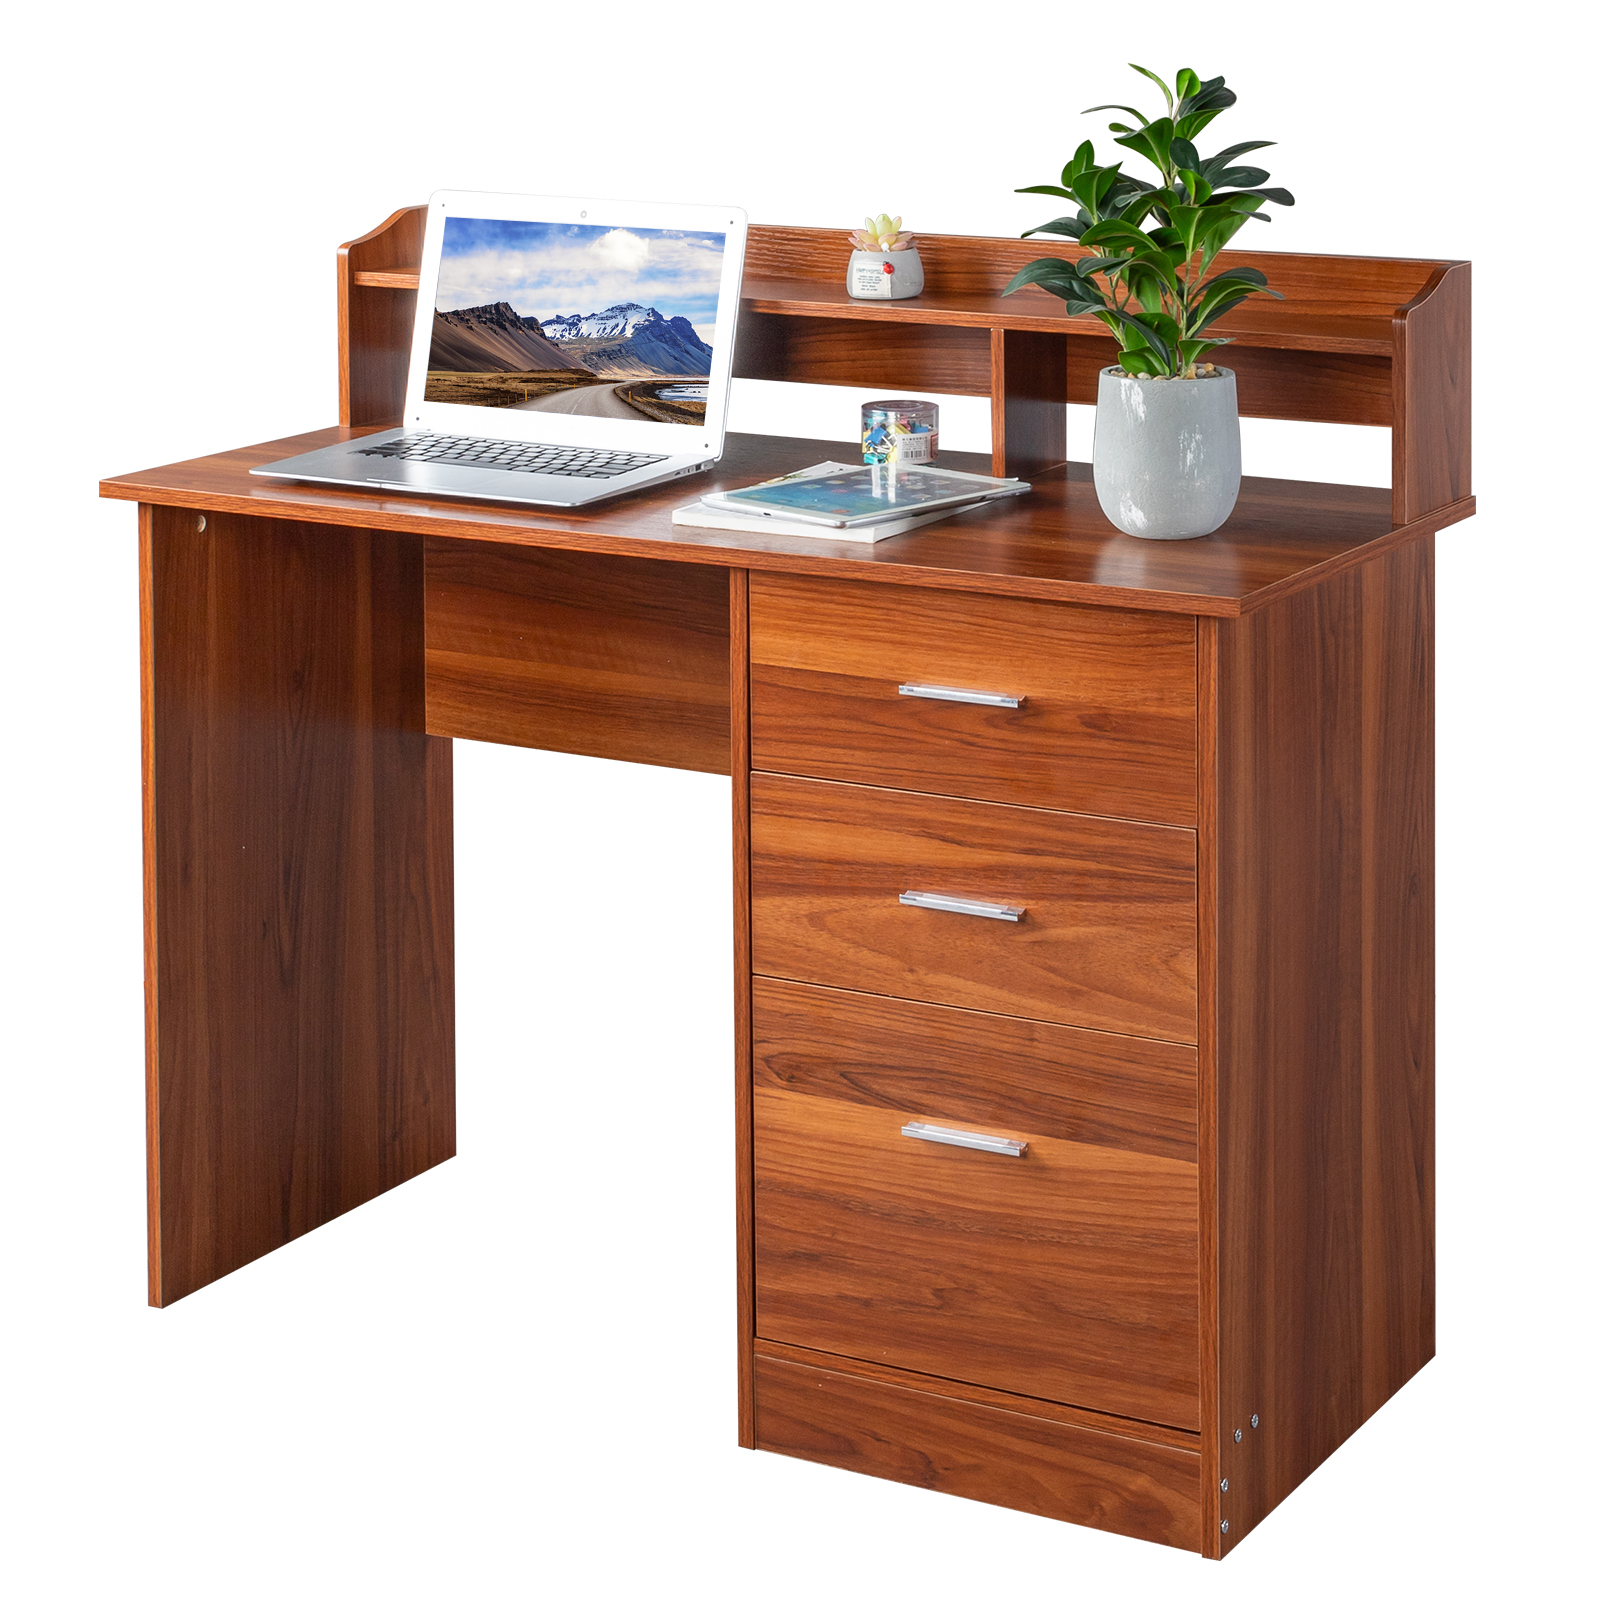 Ktaxon Wood Computer Desk Office Laptop PC Work Table, Writing Desk with 3 Drawers File Cabinet for Letter Size,Wulnut - image 2 of 13